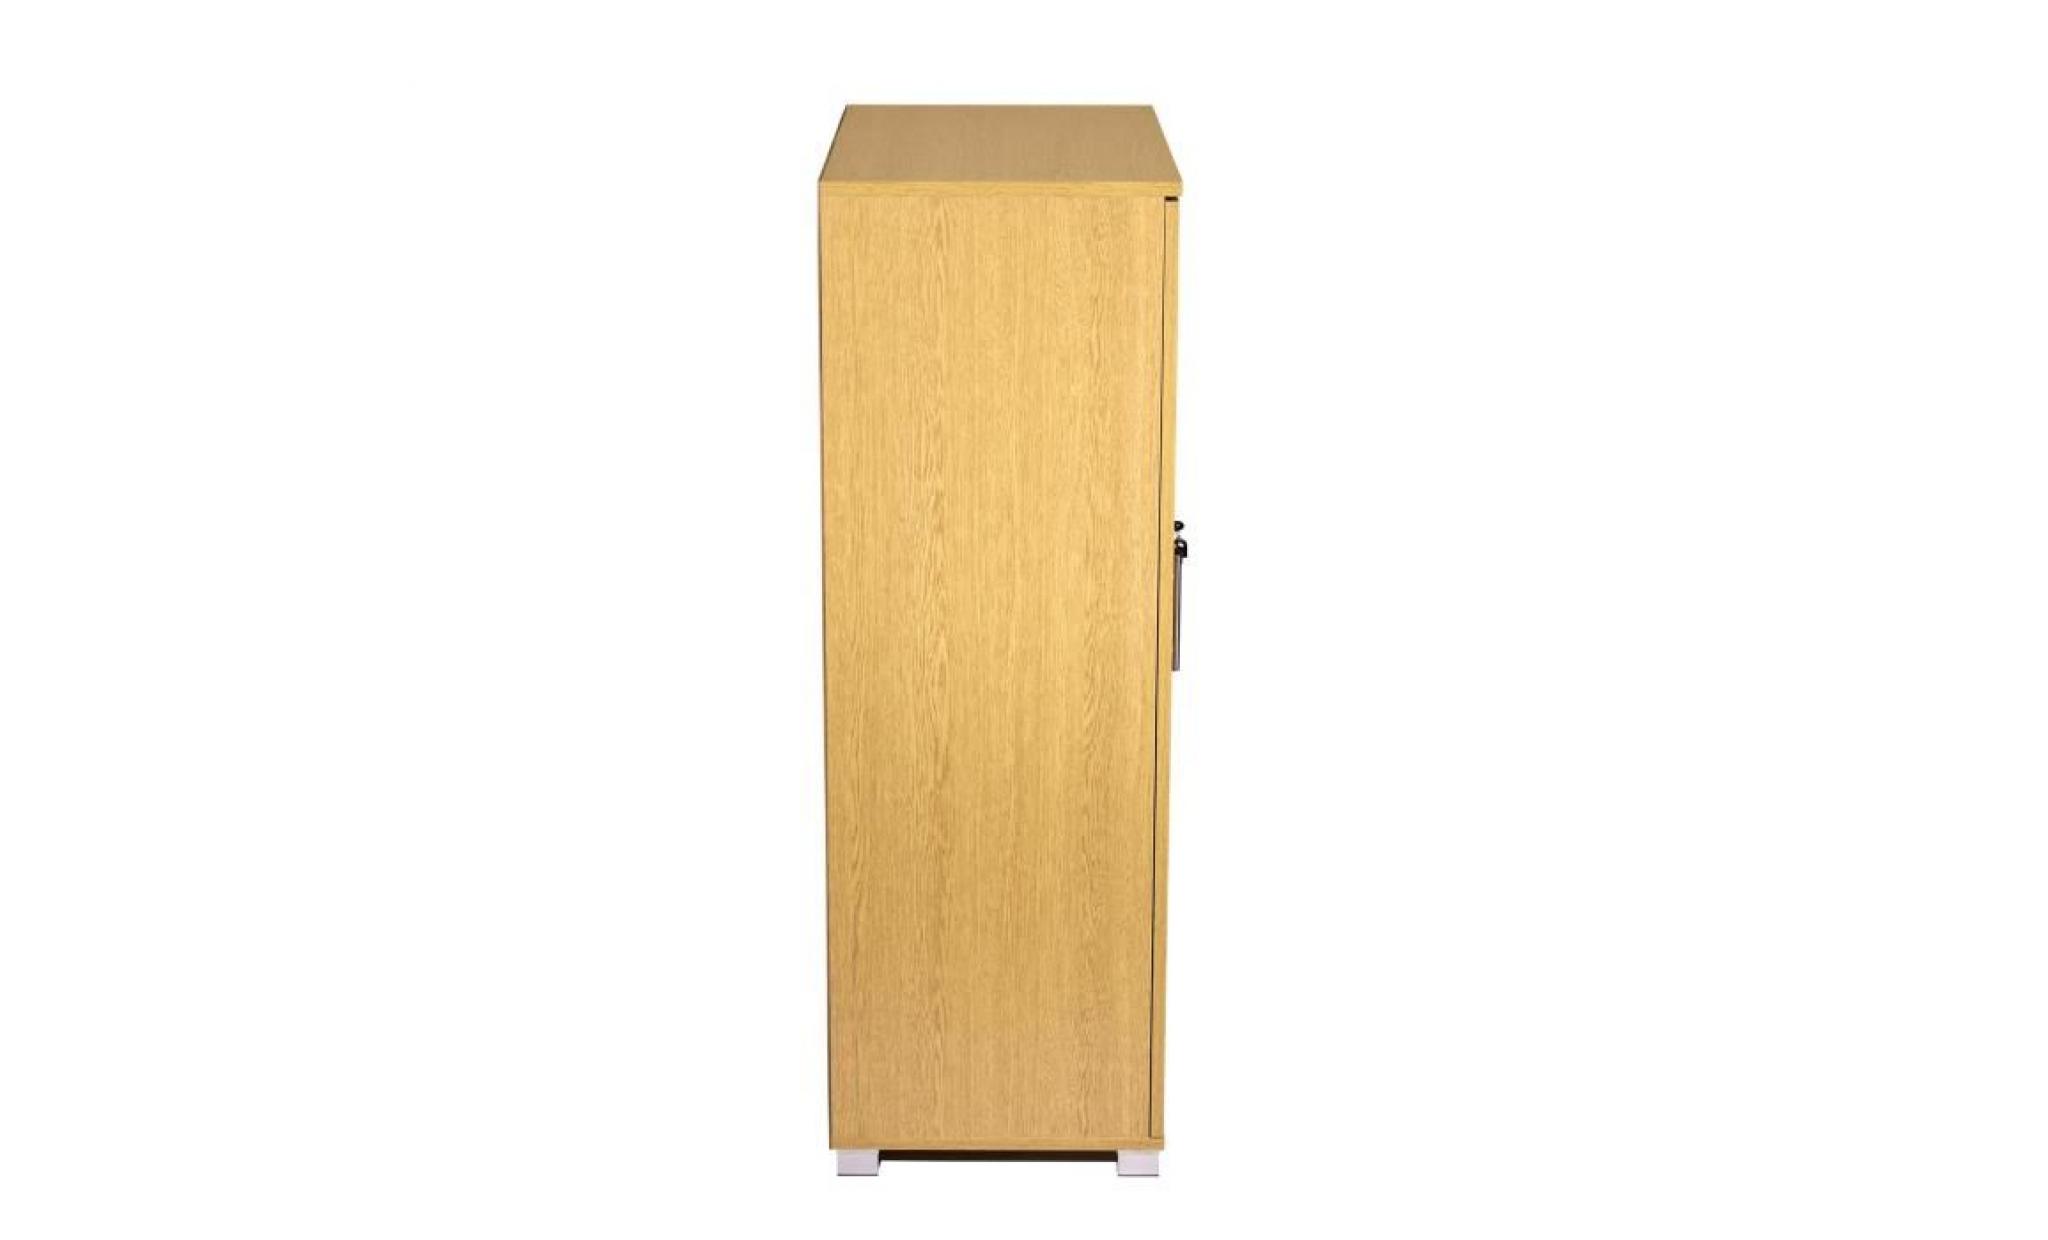 mmt sd iv04lockable storage cupboard filing cabinet 120cm tall pas cher